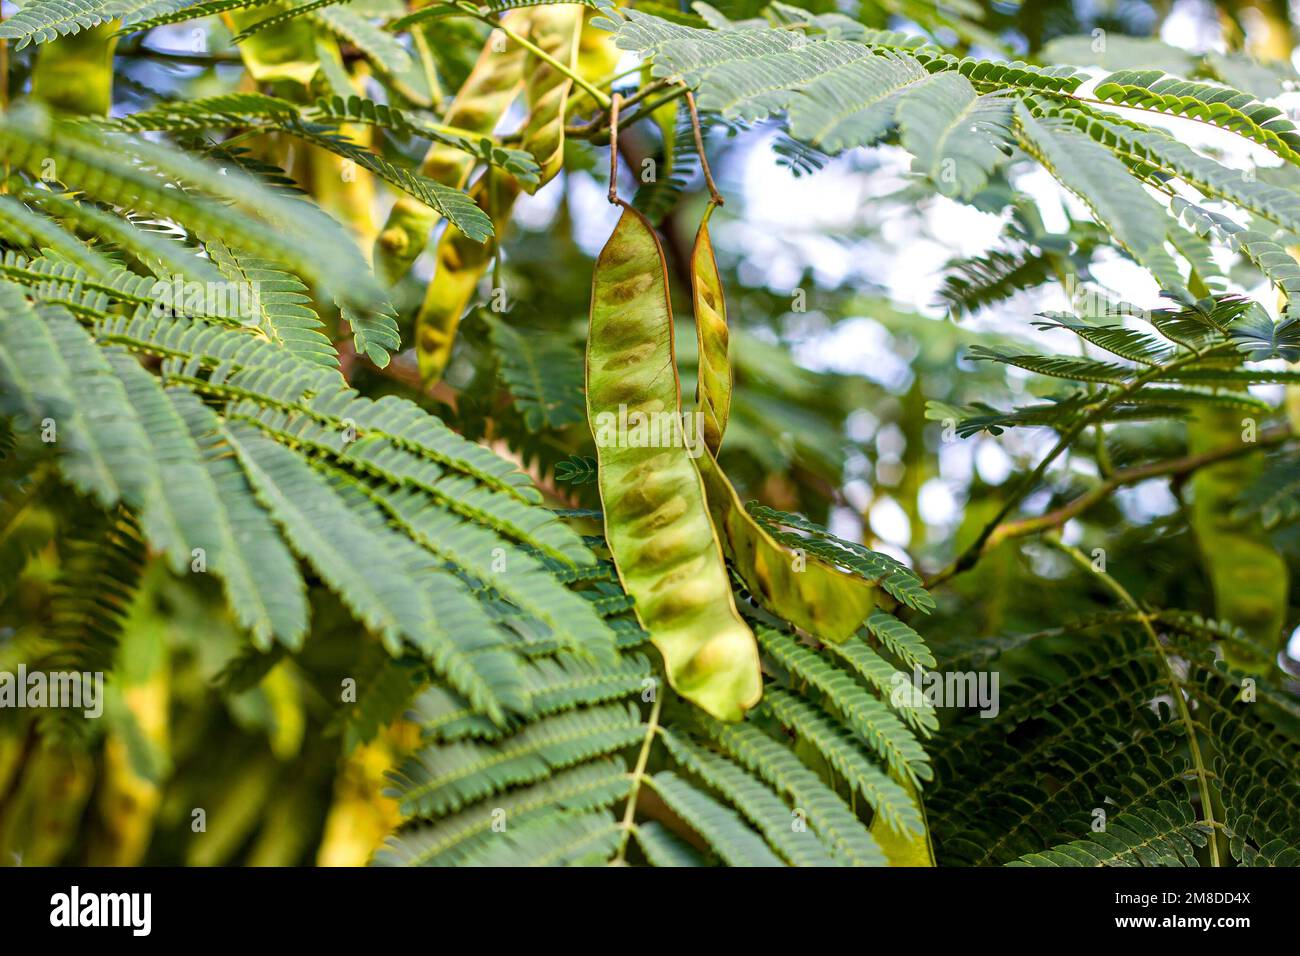 Bright green leaves and seed pods of Honey Locust (Gleditsia Triacanthos) bush in the botanic garden in summer close up. Stock Photo